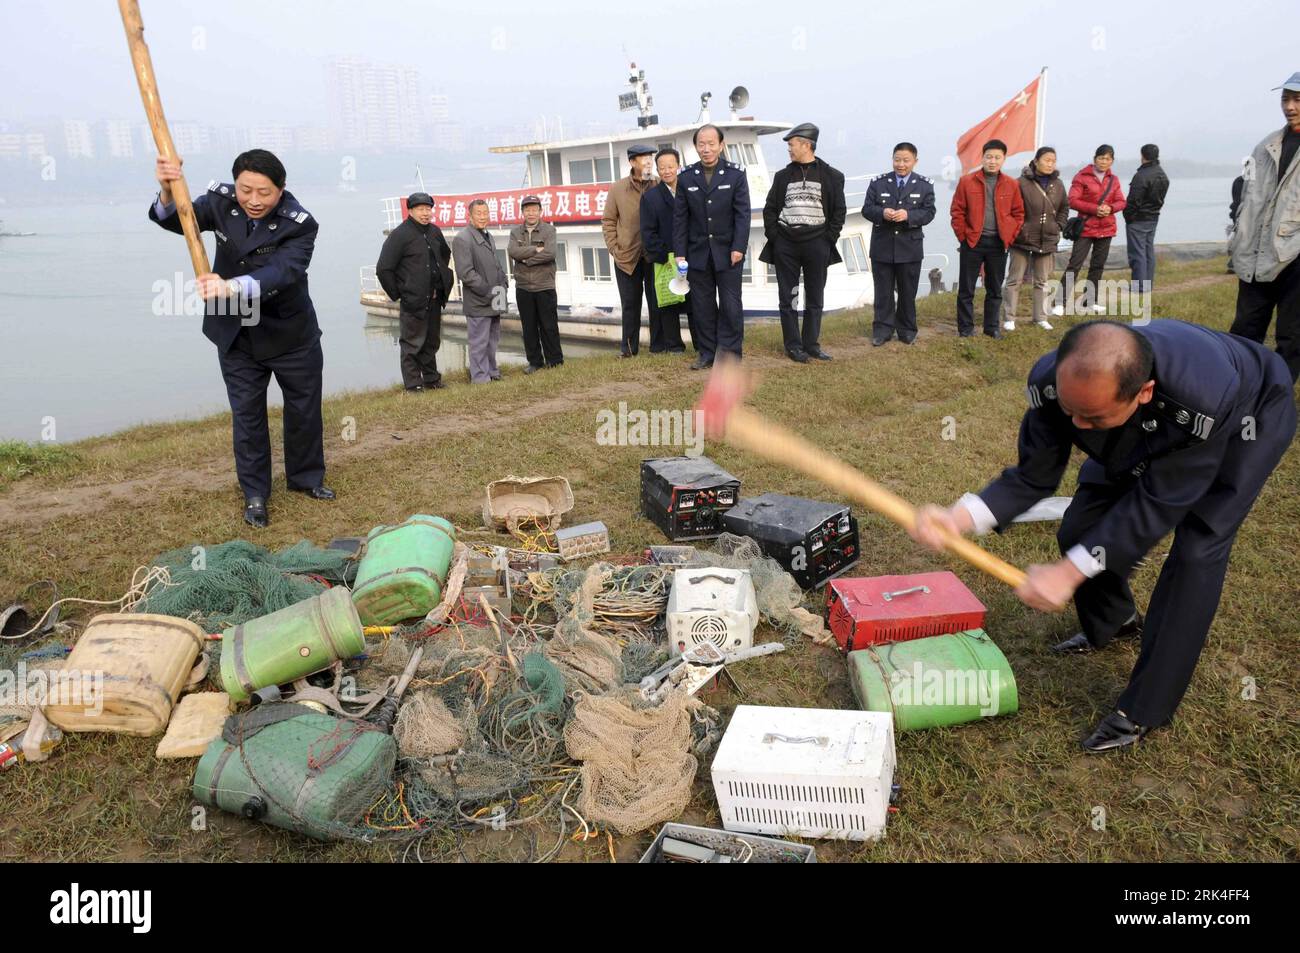 Bildnummer: 53625883  Datum: 24.11.2009  Copyright: imago/Xinhua (091125) -- NANCHONG, Nov. 25, 2009 (Xinhua) -- Staff workers with local fishery administration scrunch the illicit fishery tools, in an ancillary action of the overall releasing of well over 2 million various species of fishes fries into the Jialingjiang River for natural aquatic propagation, at Nanchong City, southwest China s Sichuan Province, Nov. 24, 2009. A large number of electric apparatus and tools for halieutics are confiscated and destroyed. (Xinhua/Cheng Chaosheng) (px) (3)CHINA-SICHUAN-JIALINGJIANG RIVER-FISH FRIES R Stock Photo